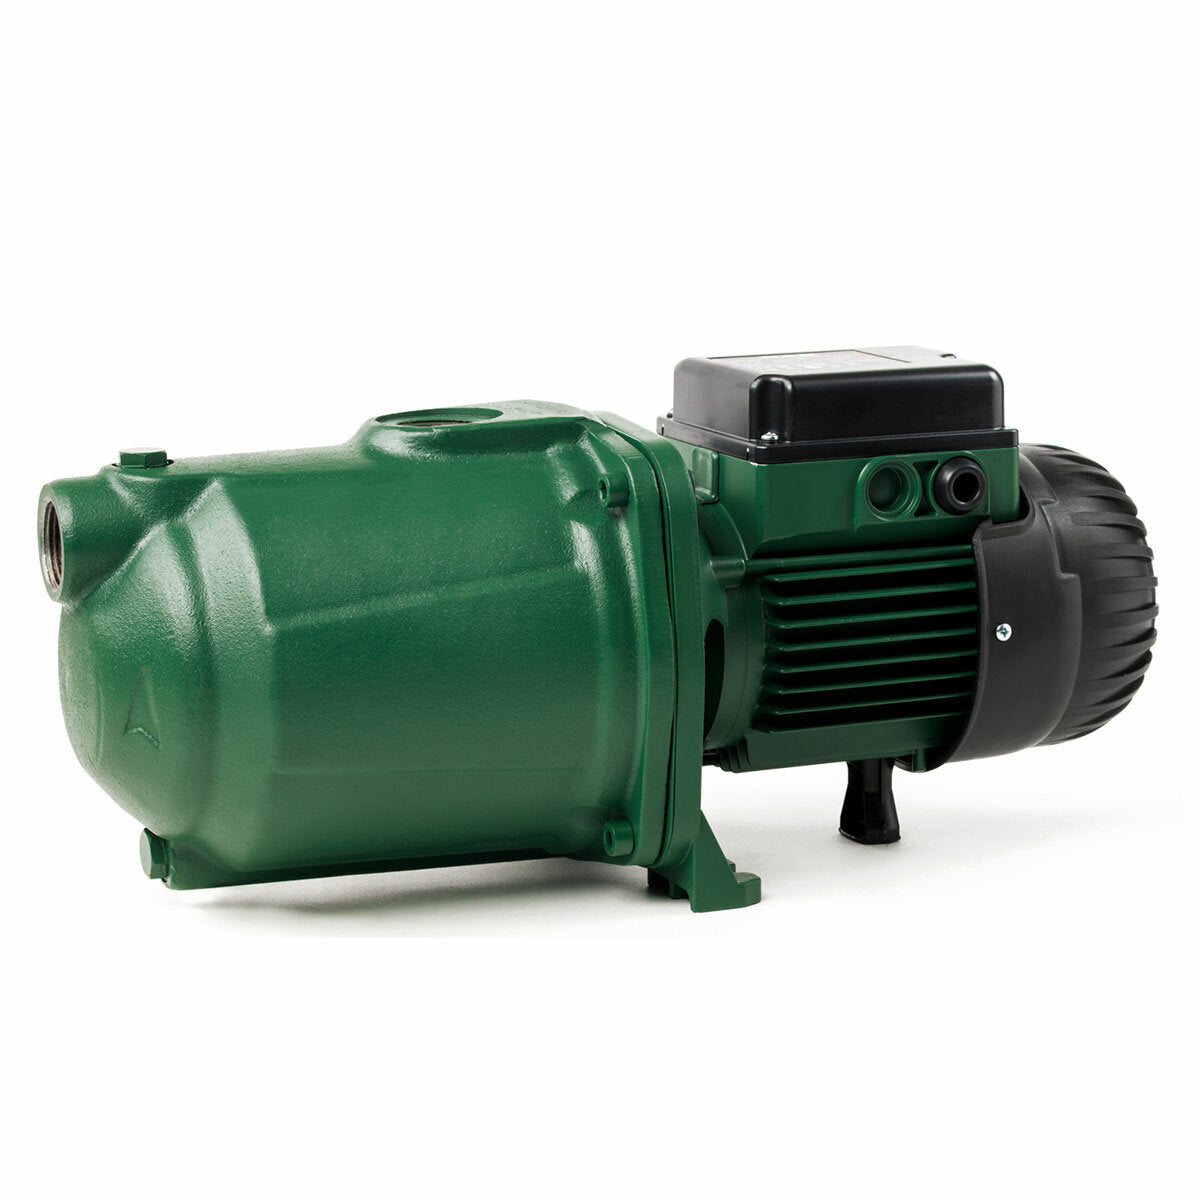 DAB EURO 30/30M multistage centrifugal surface pump single-phase 0,6 HP/0,45 kW